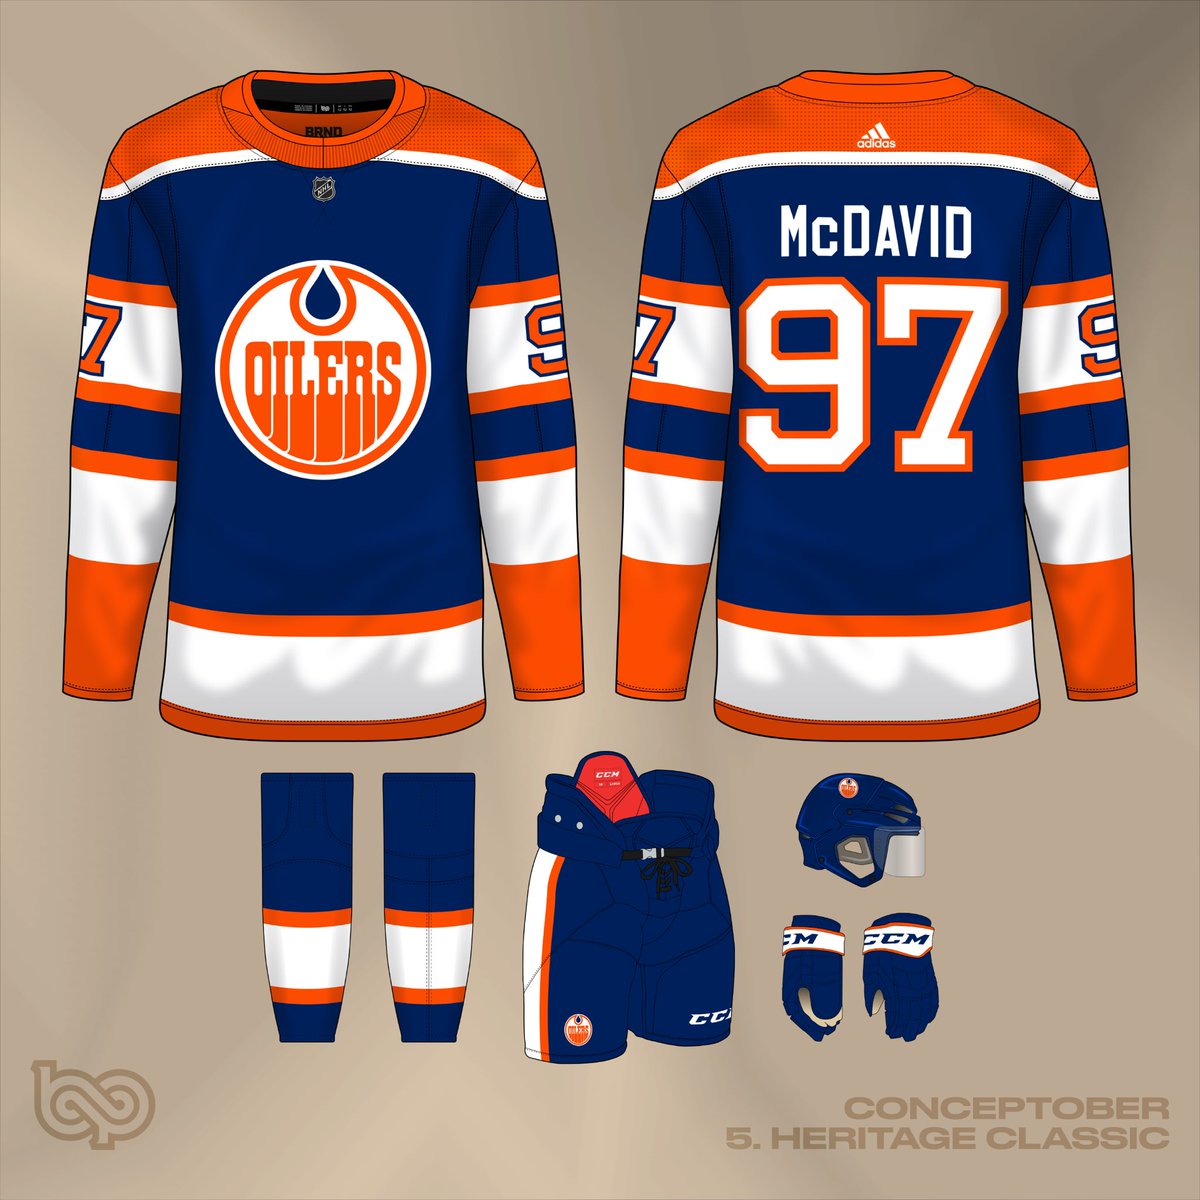 #Conceptober Day 5: Heritage Classic #conceptober2023 @The_JerseyNerds